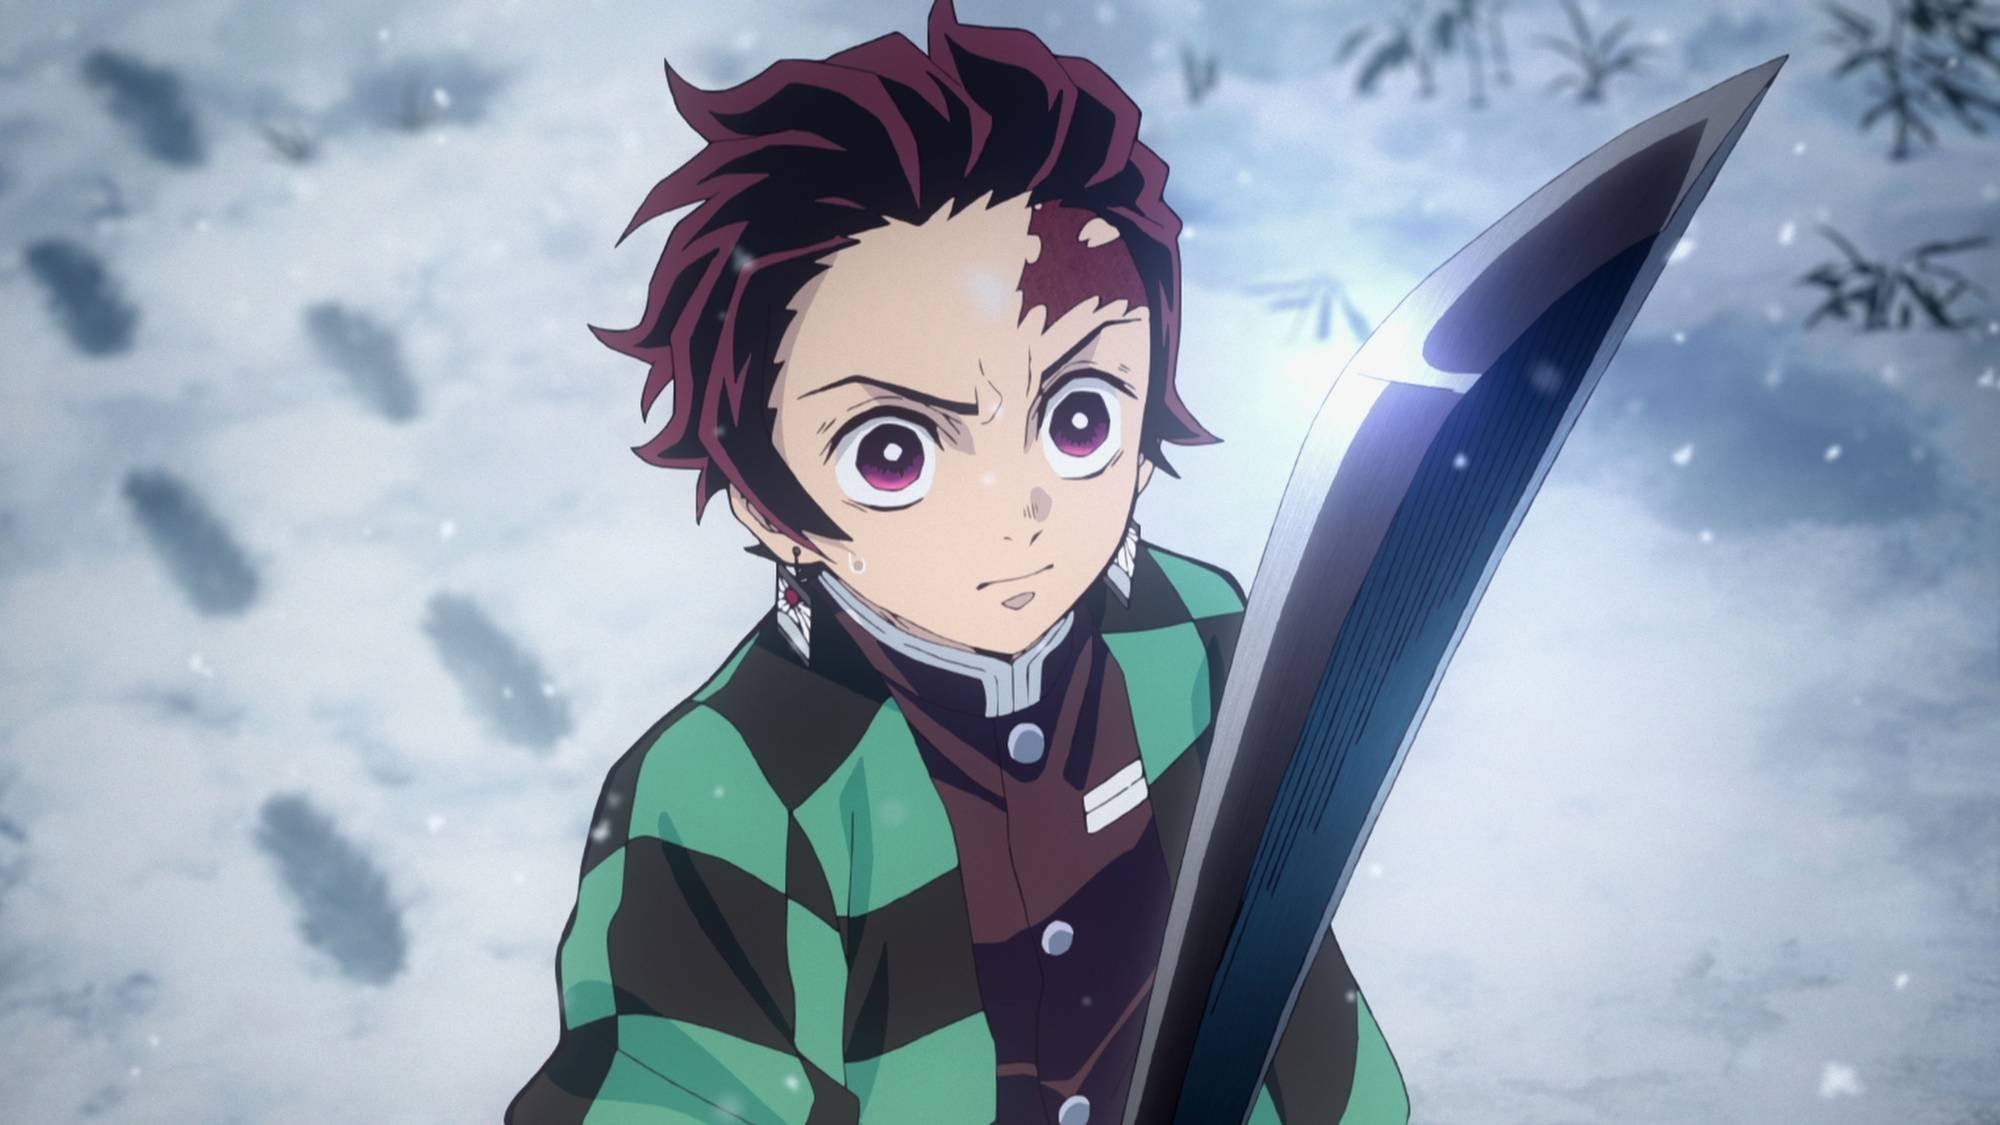 Demon Slayer: Every Character's Age, Height, And Birthday